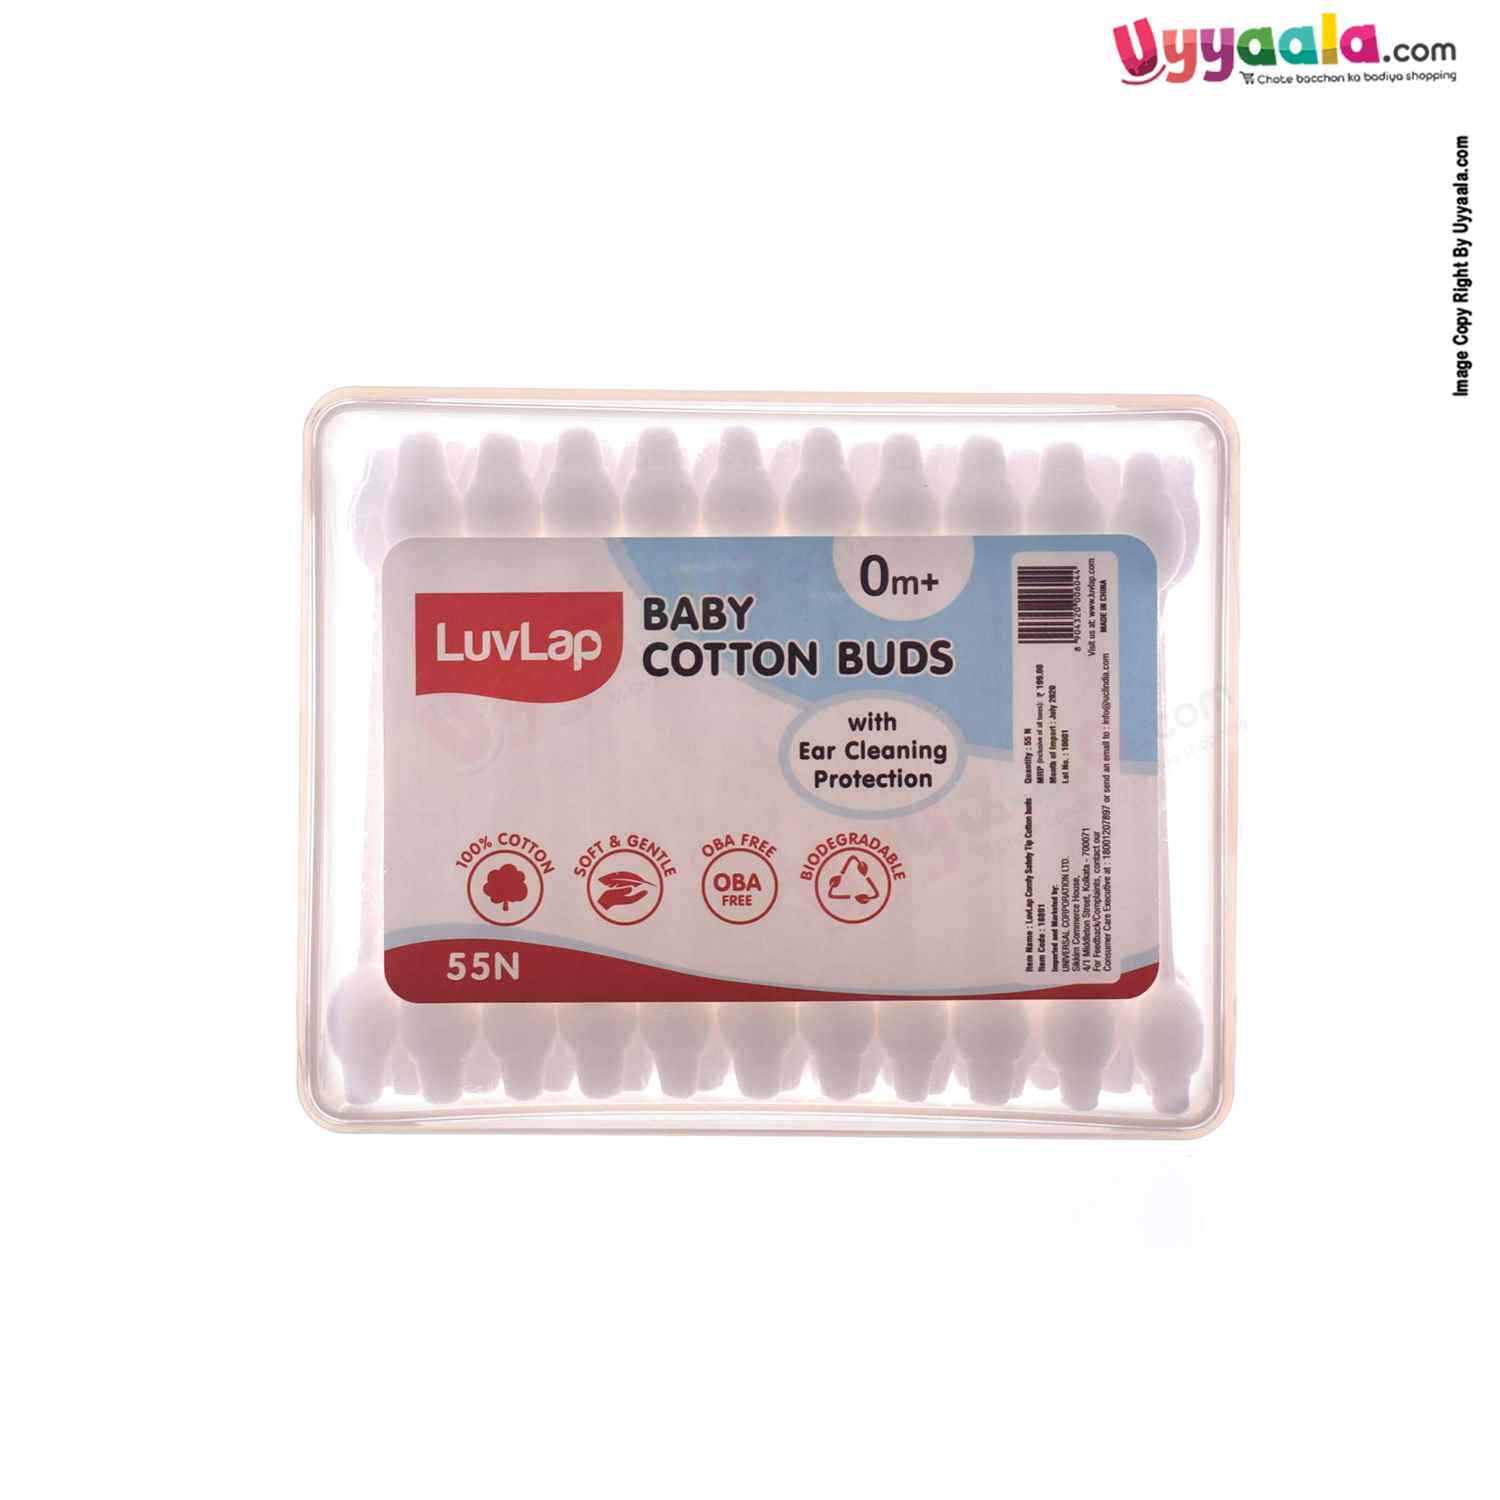 LUVLAP Soft Cotton Baby Earbuds, Twin Head, Hygienic and Baby Safe, 55pcs